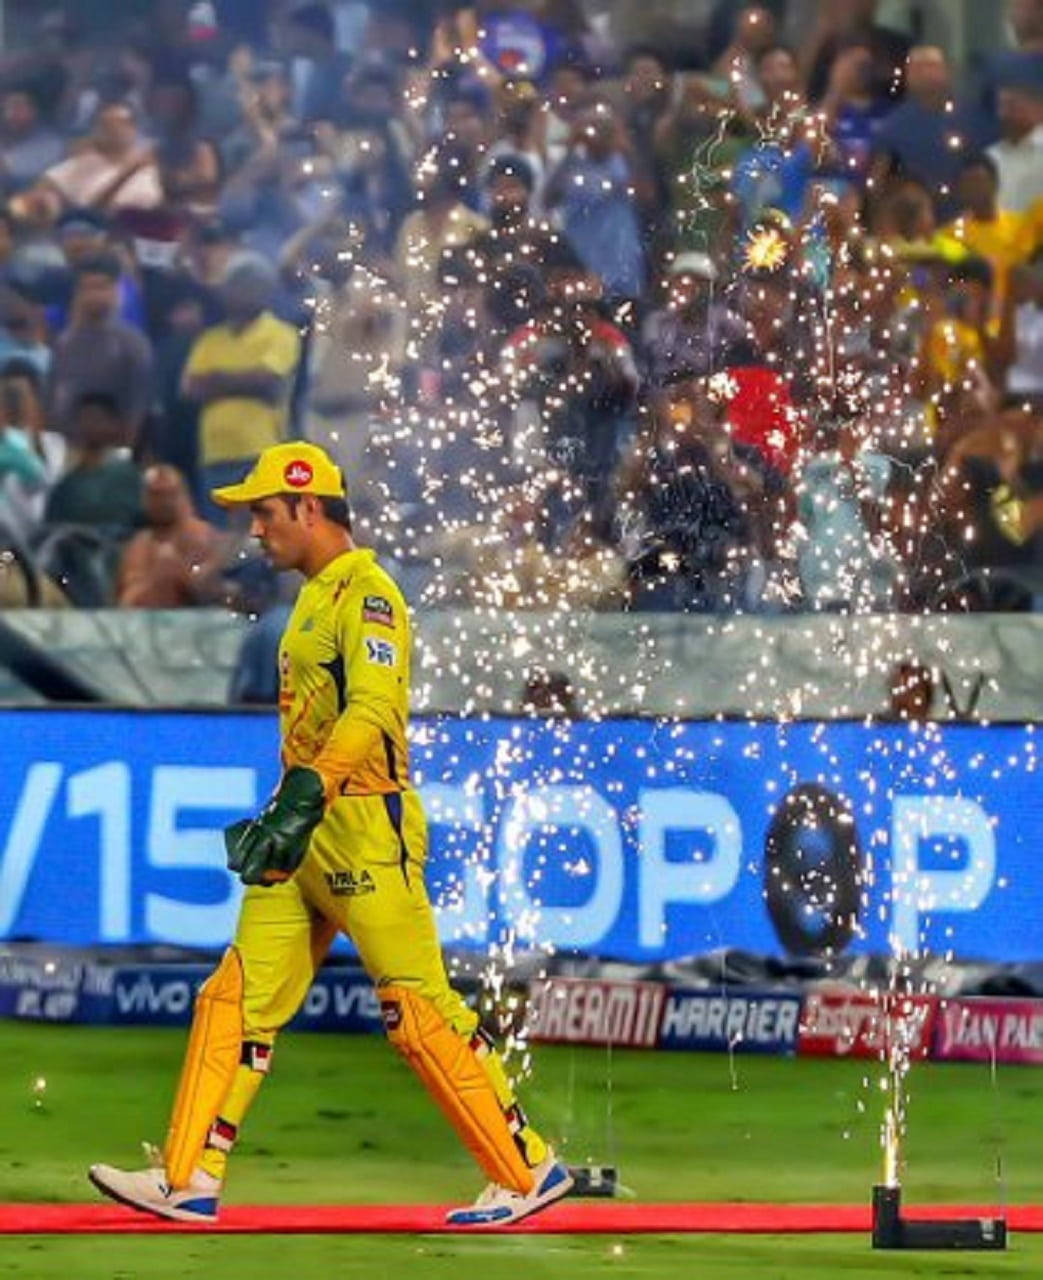 Msd Walking With Fireworks Background